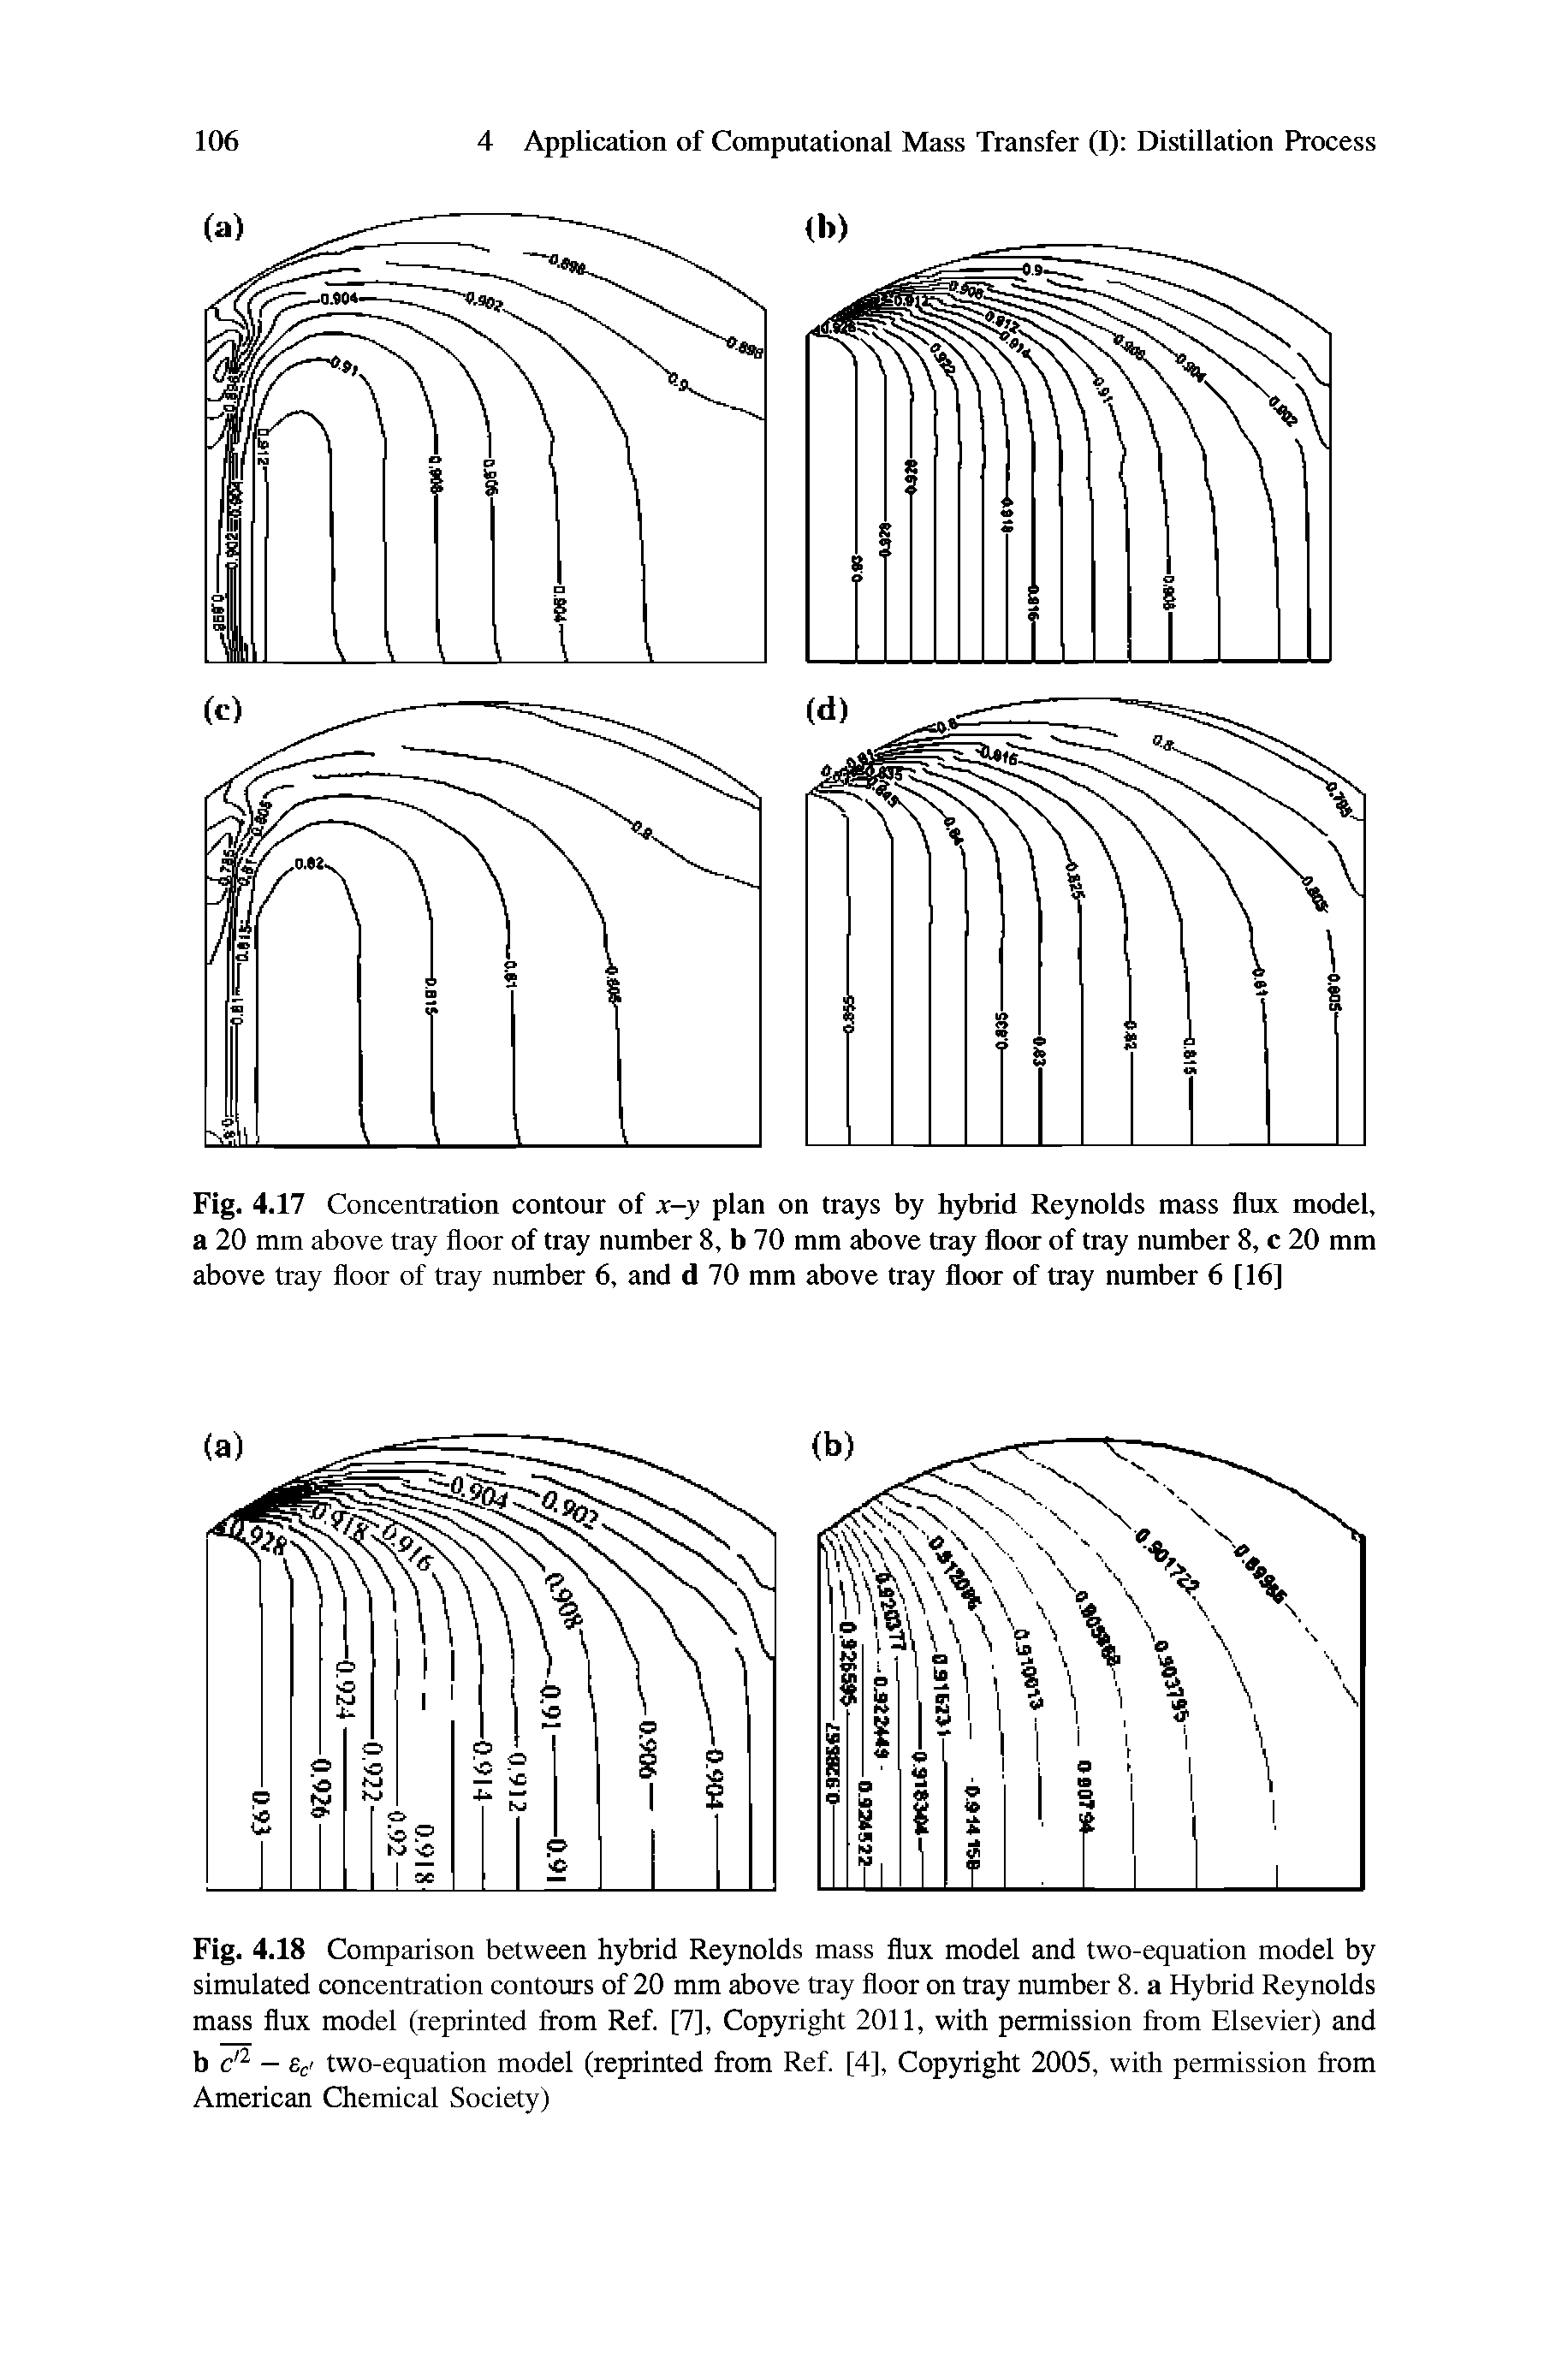 Fig. 4.18 Comparison between hybrid Reynolds mass flux model and two-equation model by simulated concentration contours of 20 mm above tray floor on tray number 8. a Hybrid Reynolds mass flux model (reprinted from Ref. [7], Copyright 2011, with permission from Elsevier) and b c - Be two-equation model (reprinted from Ref [4], Copyright 2005, with permission from American Chemical Society)...